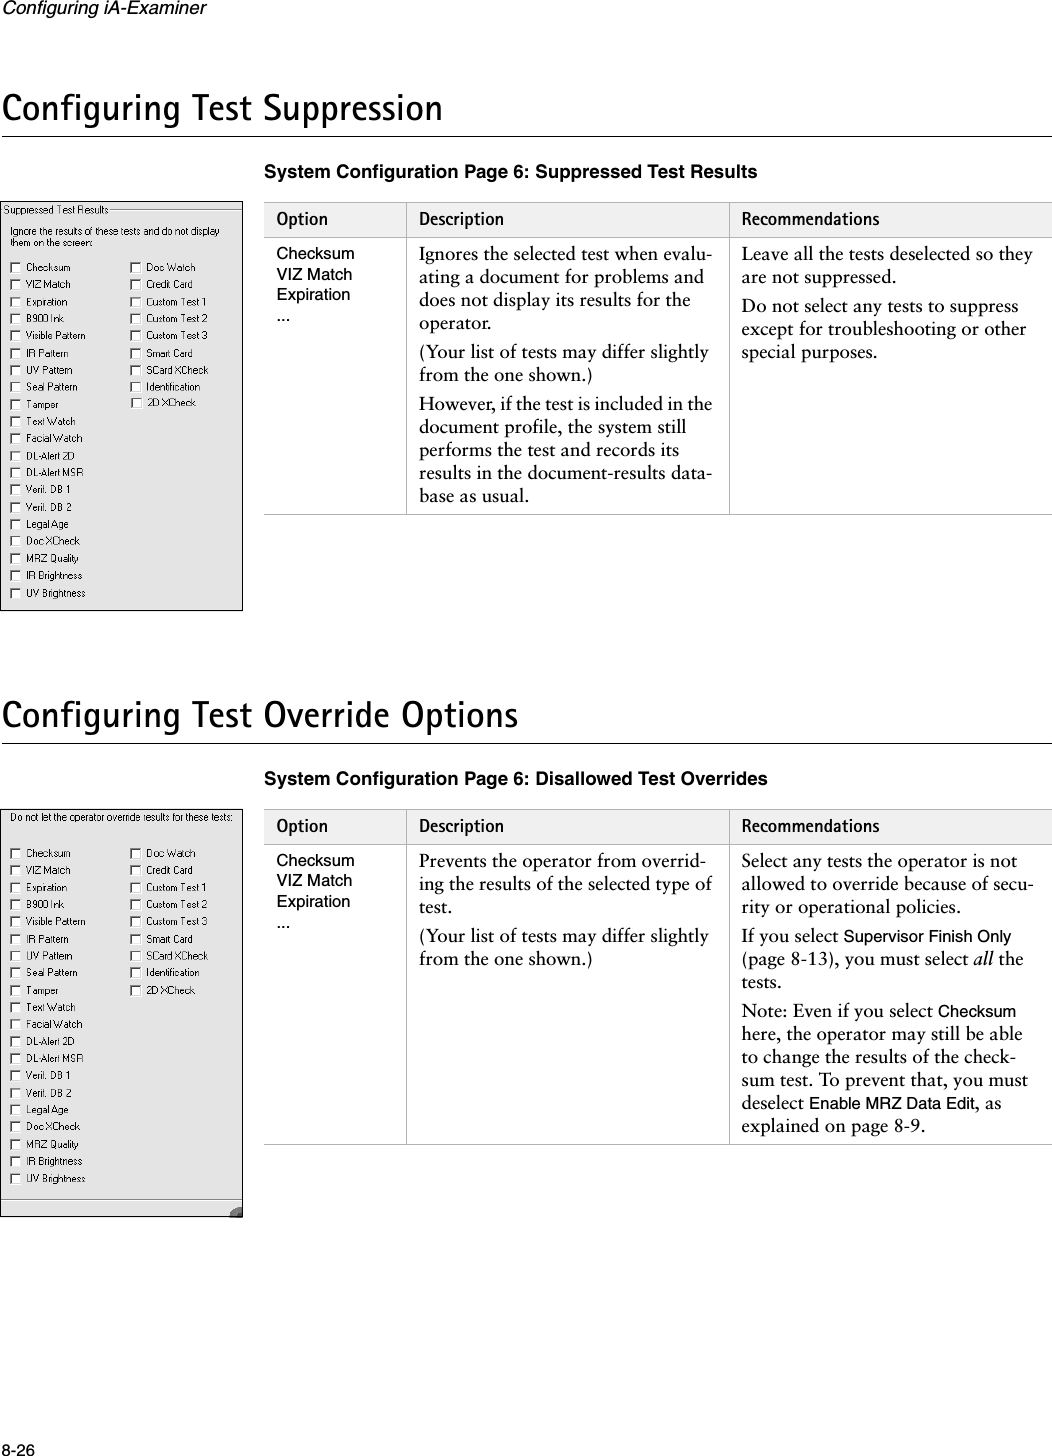 Configuring iA-Examiner8-26Configuring Test SuppressionSystem Configuration Page 6: Suppressed Test ResultsConfiguring Test Override OptionsSystem Configuration Page 6: Disallowed Test OverridesOption Description RecommendationsChecksumVIZ MatchExpiration...Ignores the selected test when evalu-ating a document for problems and does not display its results for the operator. (Your list of tests may differ slightly from the one shown.)However, if the test is included in the document profile, the system still performs the test and records its results in the document-results data-base as usual.Leave all the tests deselected so they are not suppressed.Do not select any tests to suppress except for troubleshooting or other special purposes.Option Description RecommendationsChecksumVIZ MatchExpiration...Prevents the operator from overrid-ing the results of the selected type of test. (Your list of tests may differ slightly from the one shown.)Select any tests the operator is not allowed to override because of secu-rity or operational policies.If you select Supervisor Finish Only (page 8-13), you must select all the tests.Note: Even if you select Checksum here, the operator may still be able to change the results of the check-sum test. To prevent that, you must deselect Enable MRZ Data Edit, as explained on page 8-9.